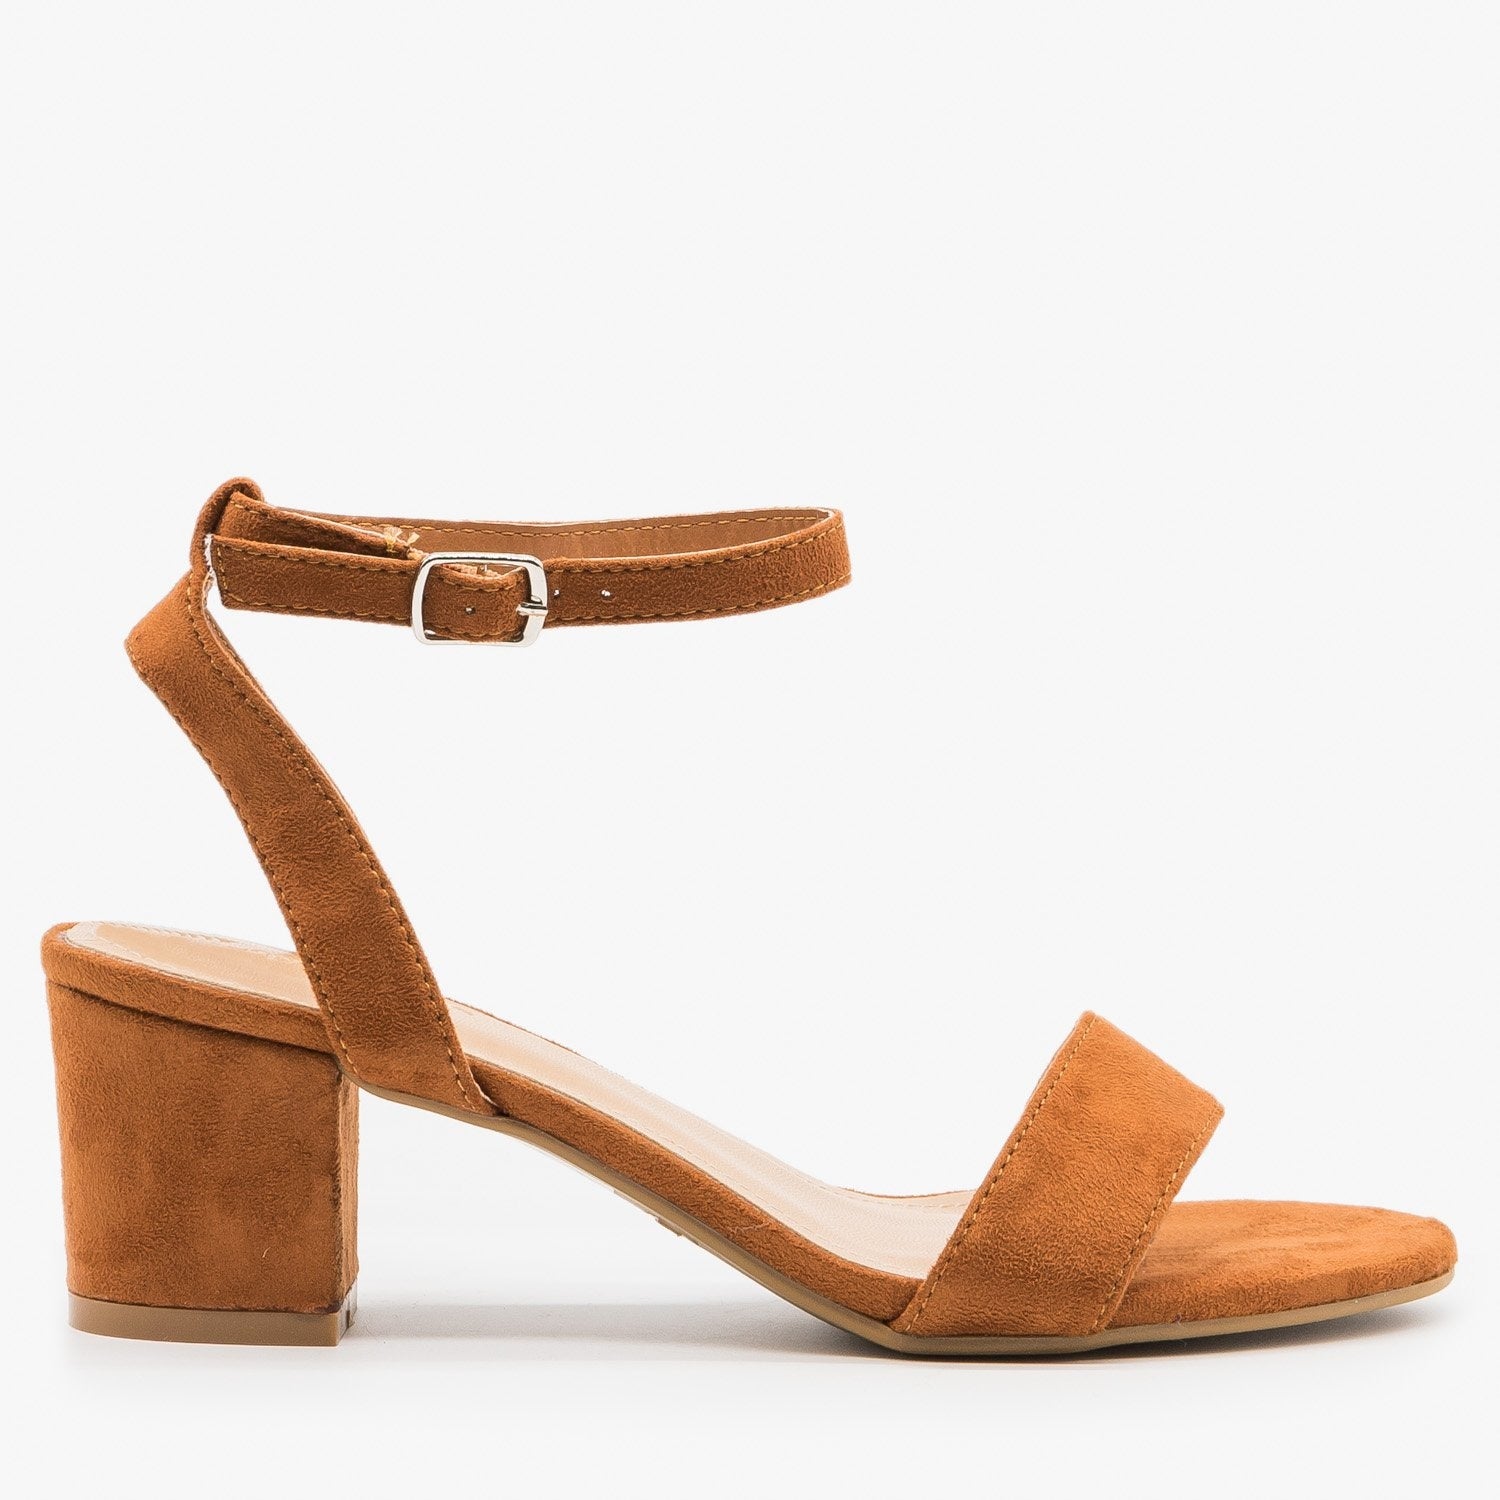 summer sandals with small heel